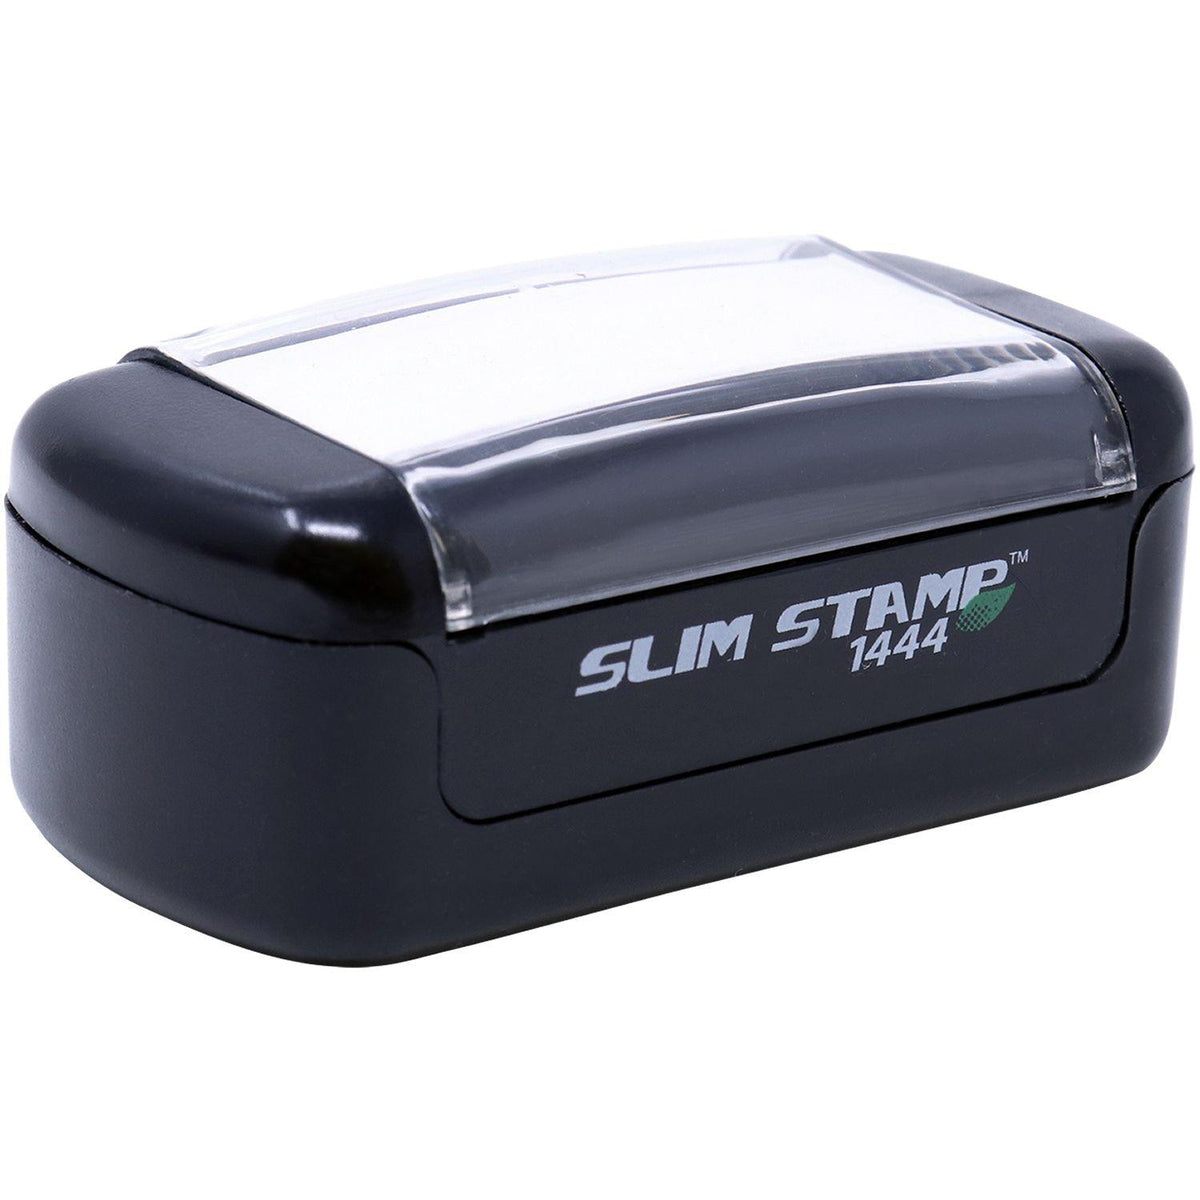 Alt View of Slim Pre-Inked Please Forward Insurance Form Stamp Mount Angle